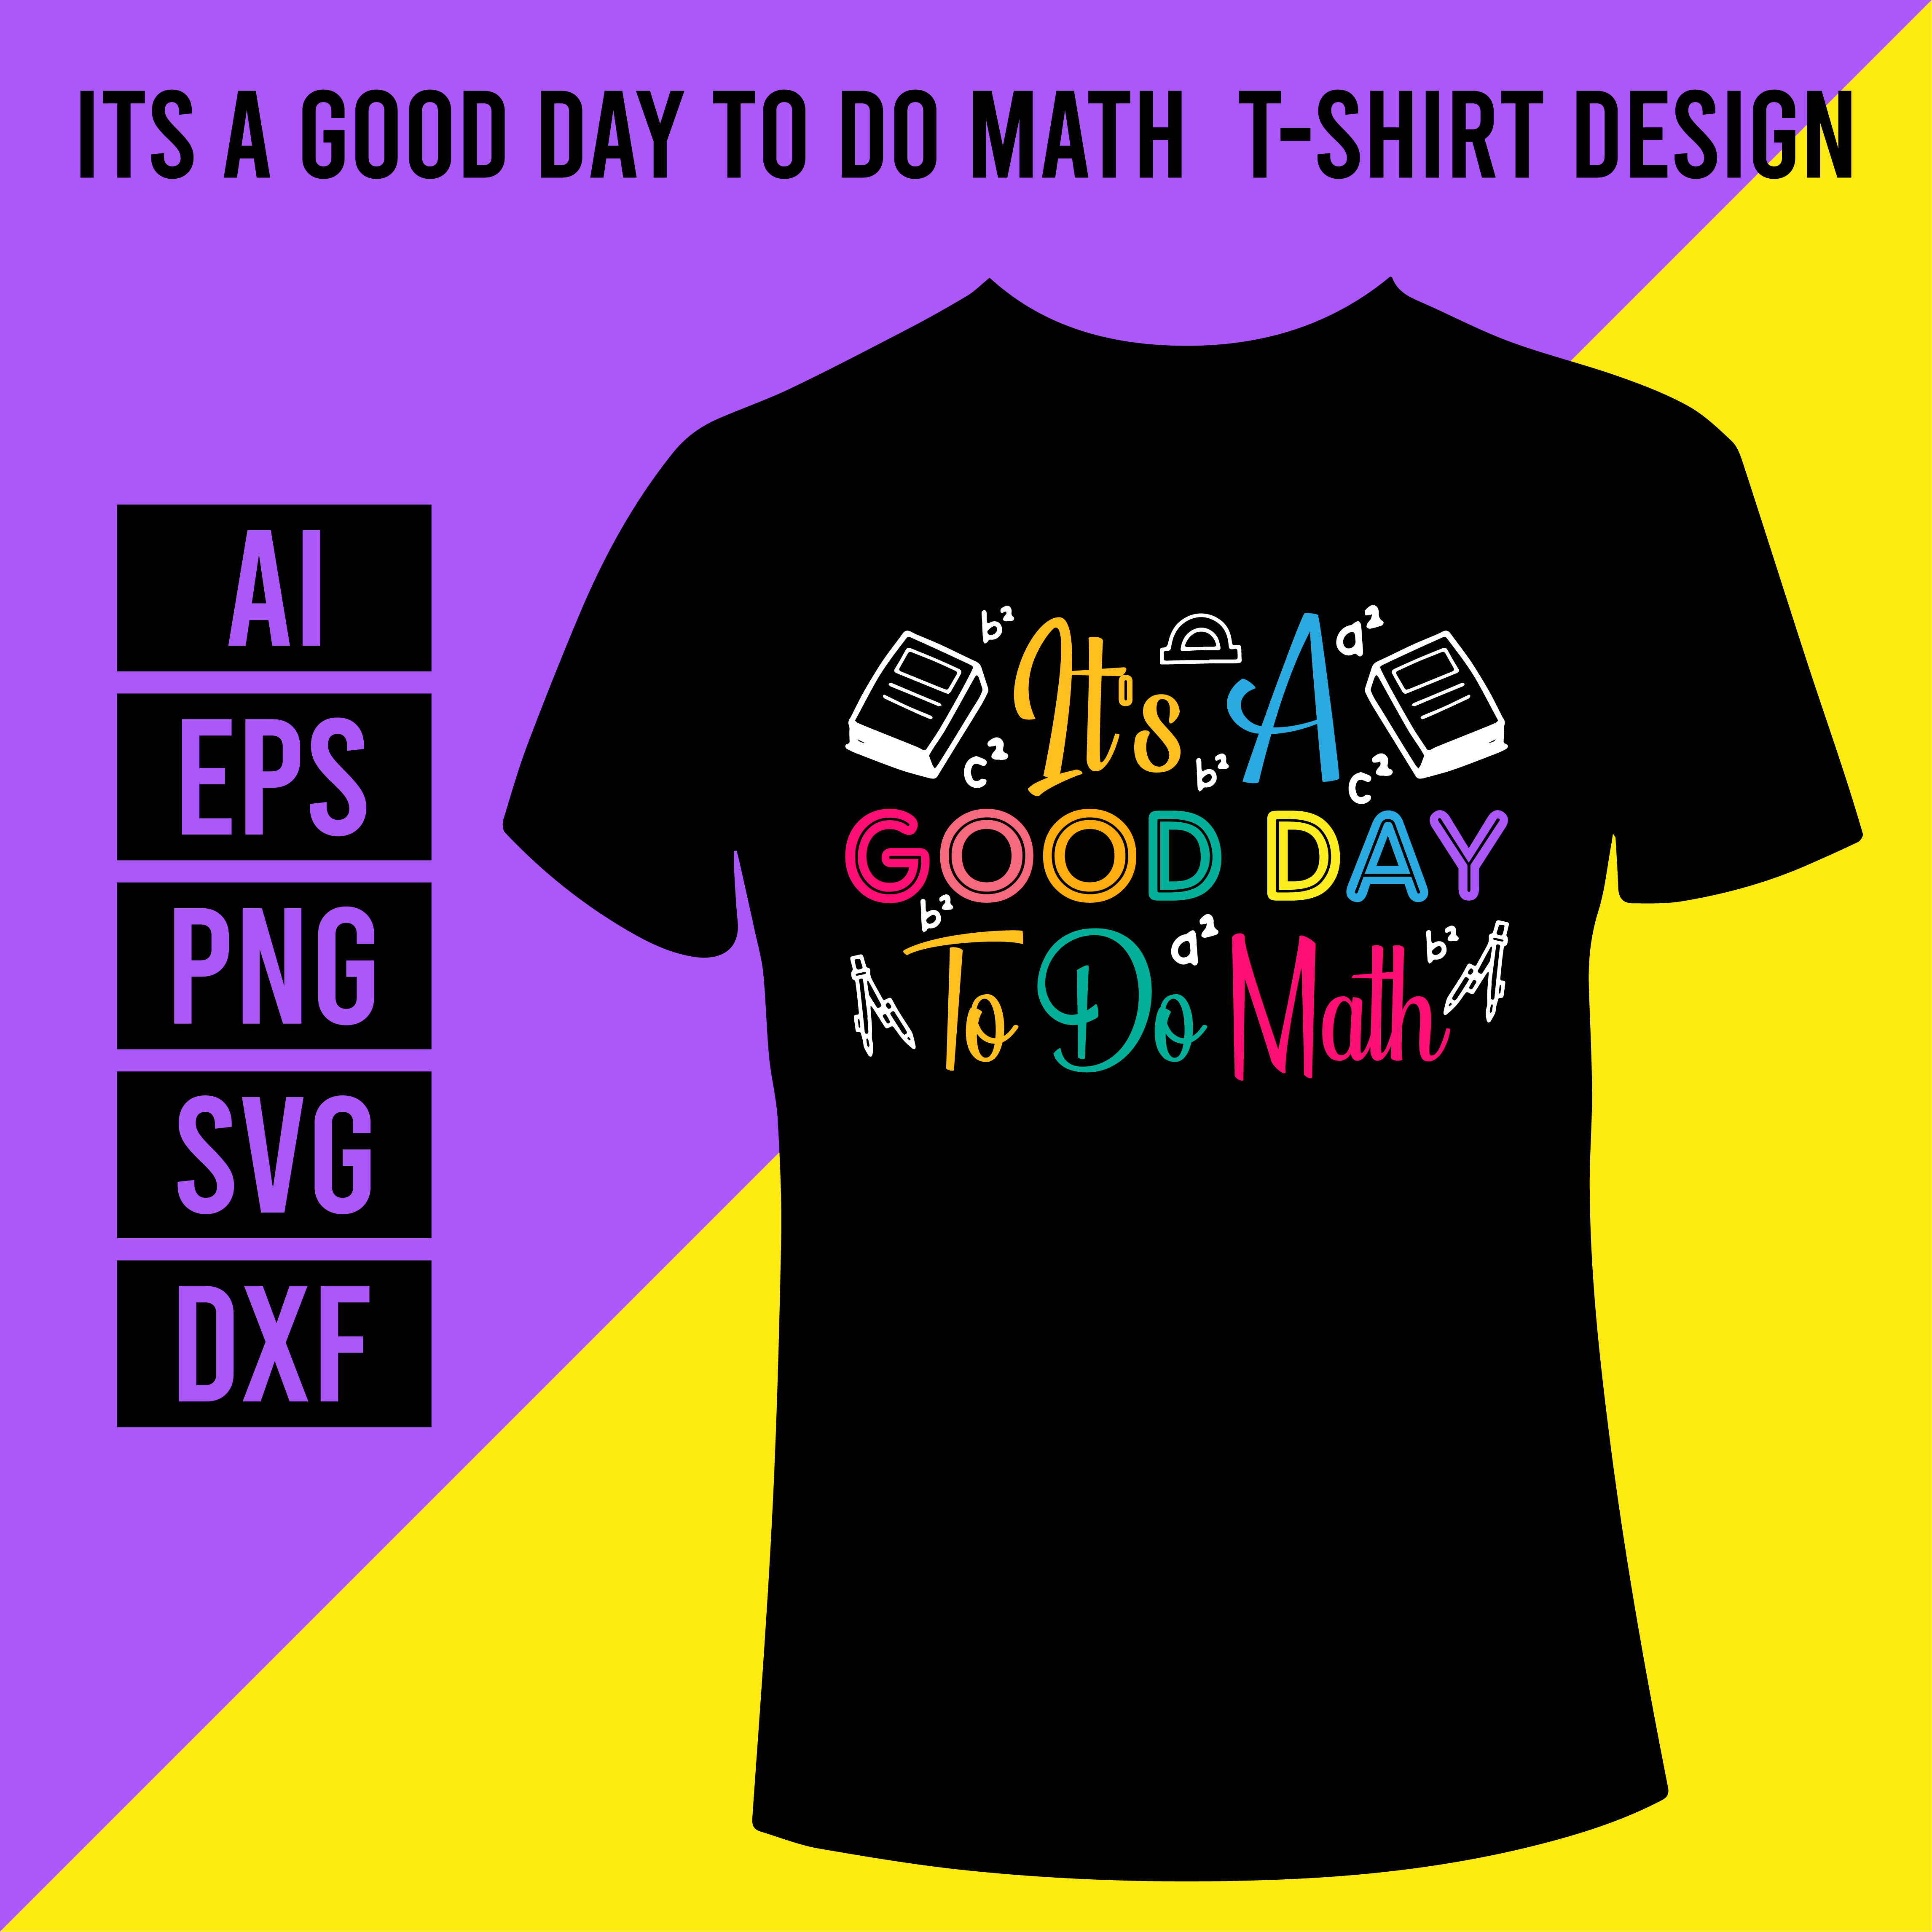 Its A Good Day To Do Math T-Shirt Design main cover.